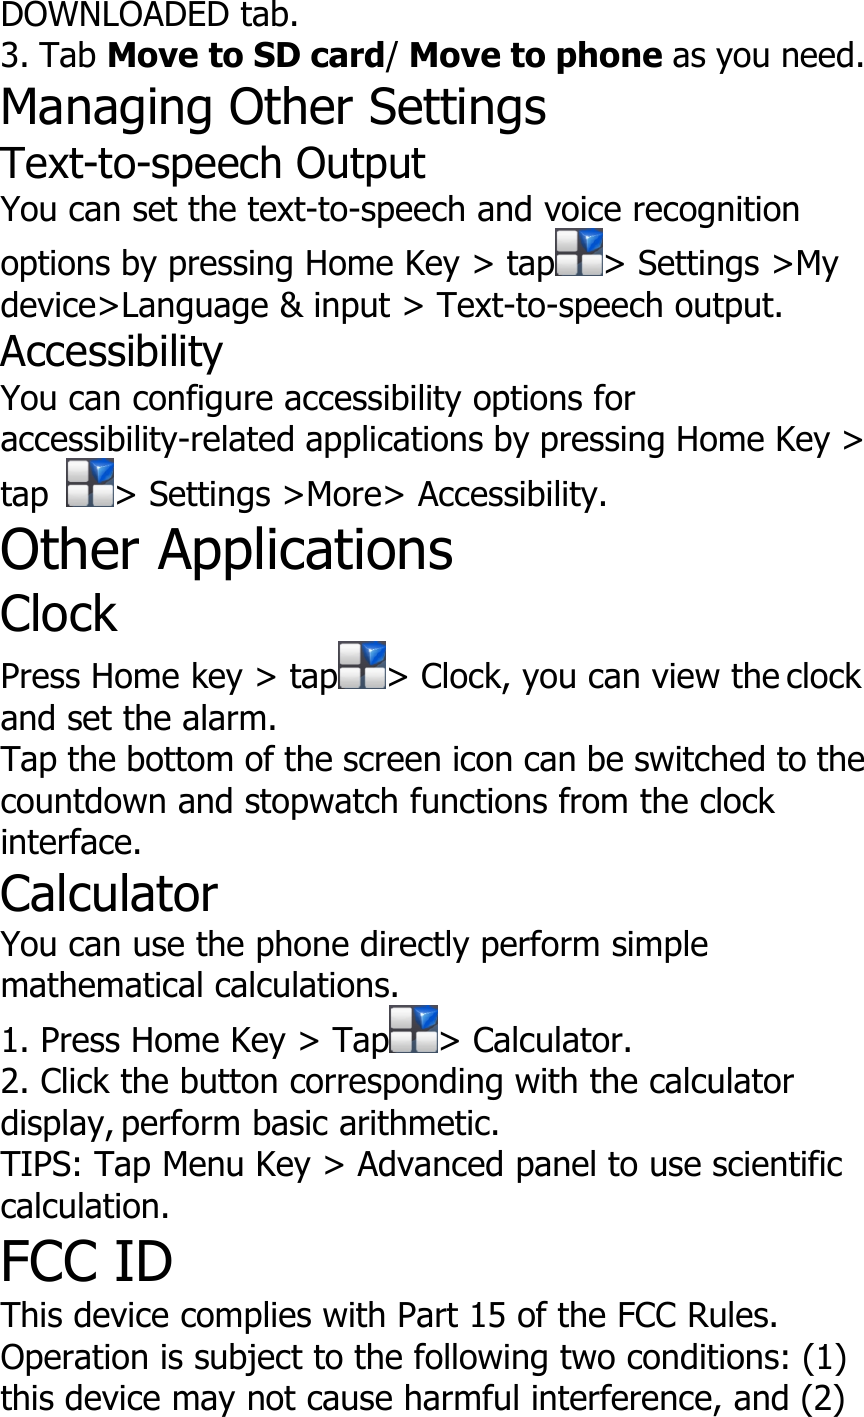 DOWNLOADED tab.3. Tab Move to SD card/Move to phone as you need.Managing Other SettingsText-to-speech OutputYou can set the text-to-speech and voice recognitionoptions by pressing Home Key &gt; tap &gt; Settings &gt;Mydevice&gt;Language &amp; input &gt; Text-to-speech output.AccessibilityYou can configure accessibility options foraccessibility-related applications by pressing Home Key &gt;tap &gt; Settings &gt;More&gt; Accessibility.Other ApplicationsClockPress Home key &gt; tap &gt; Clock, you can view the clockand set the alarm.Tap the bottom of the screen icon can be switched to thecountdown and stopwatch functions from the clockinterface.CalculatorYou can use the phone directly perform simplemathematical calculations.1. Press Home Key &gt; Tap &gt; Calculator.2. Click the button corresponding with the calculatordisplay, perform basic arithmetic.TIPS: Tap Menu Key &gt; Advanced panel to use scientificcalculation.FCC IDThis device complies with Part 15 of the FCC Rules.Operation is subject to the following two conditions: (1)this device may not cause harmful interference, and (2)